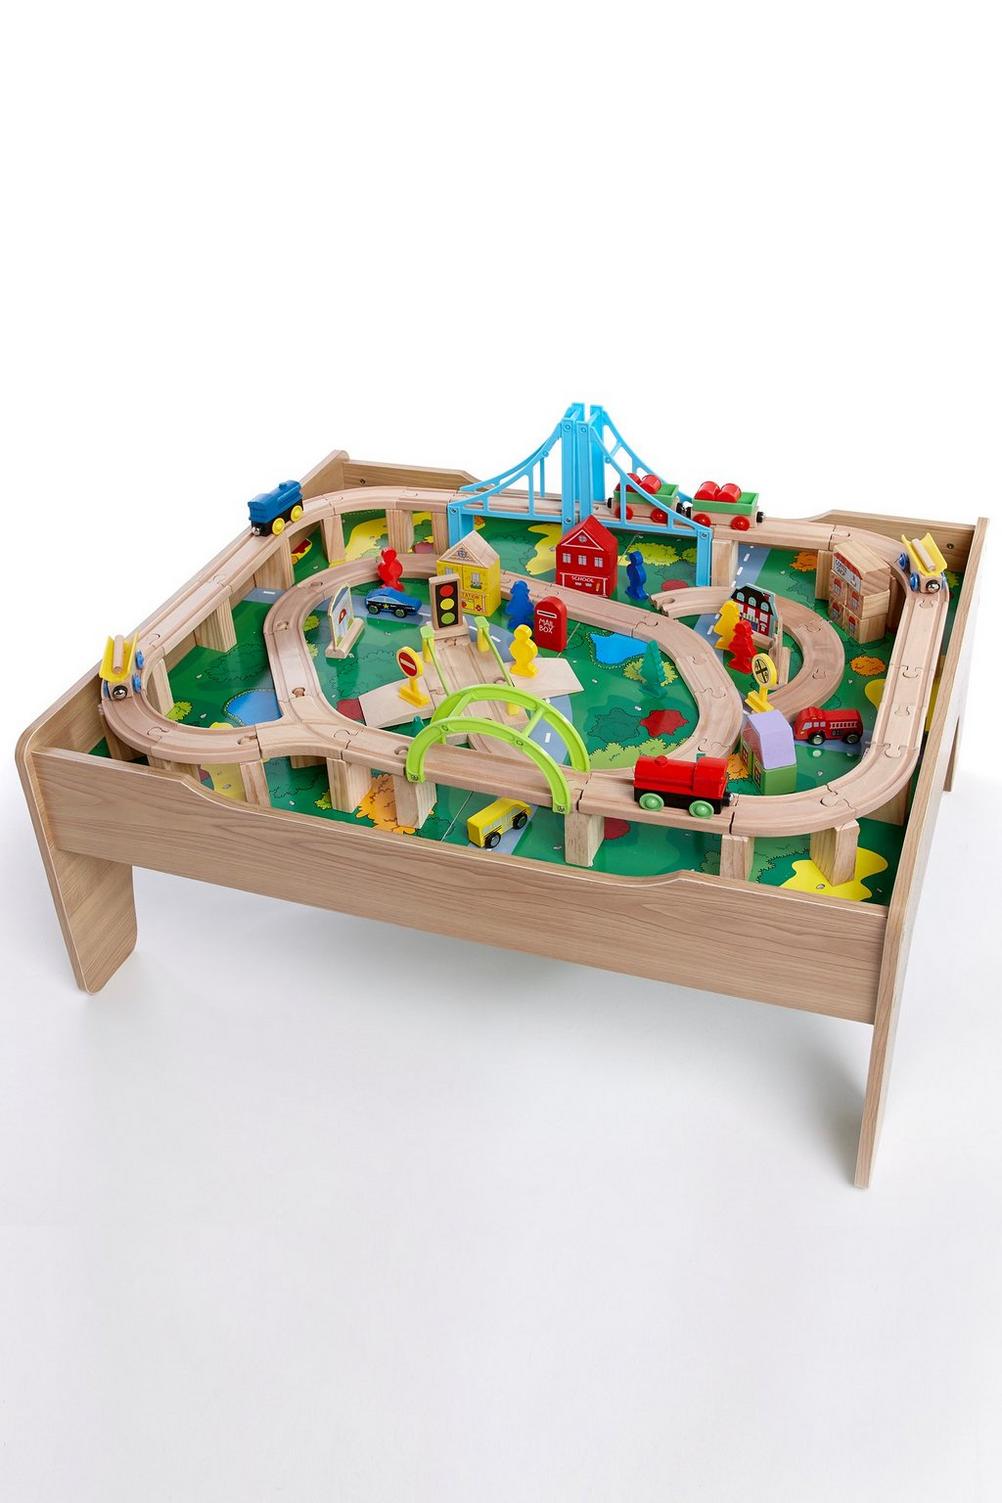 120 Piece Wooden Train Set Reversible City Table With Storage Drawer ...